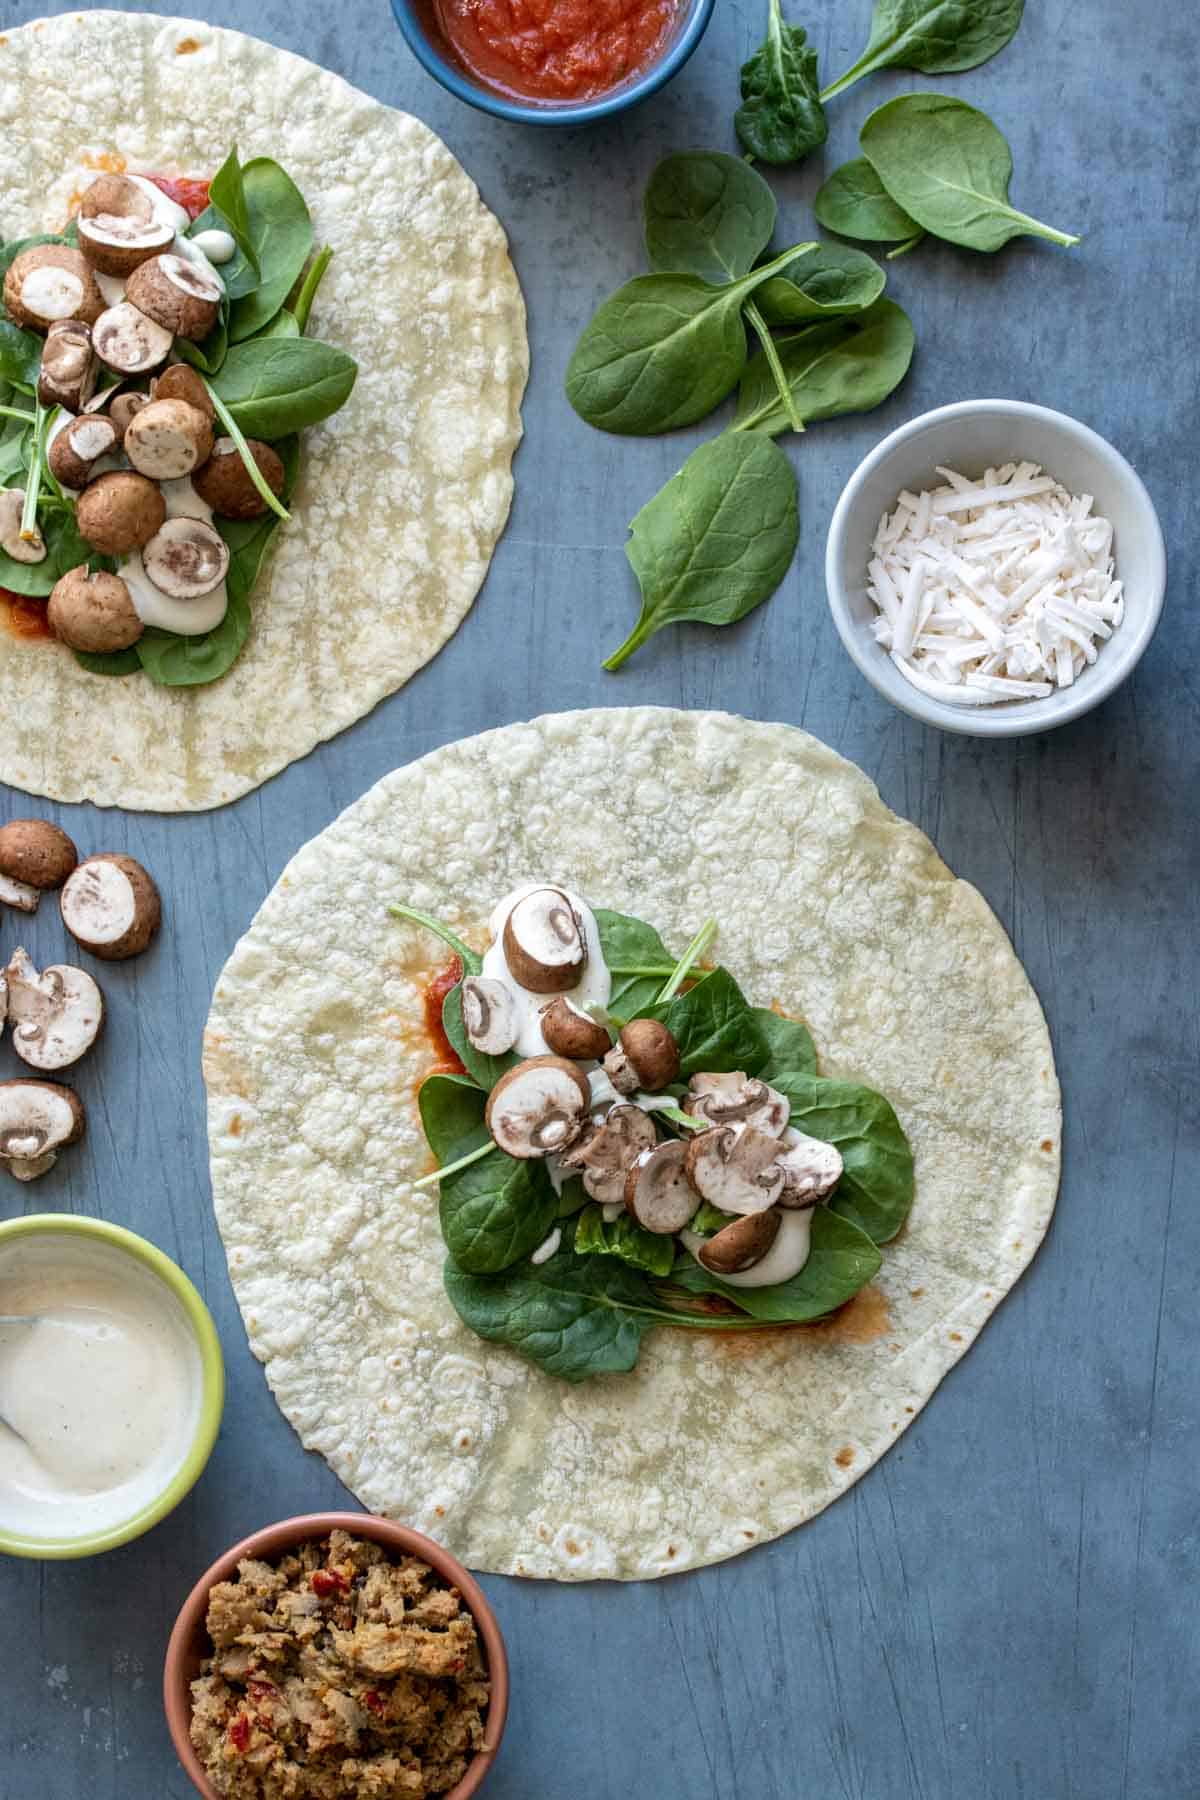 A tortilla on a grey surface with spinach, sauce and mushrooms on it and other pizza ingredients around